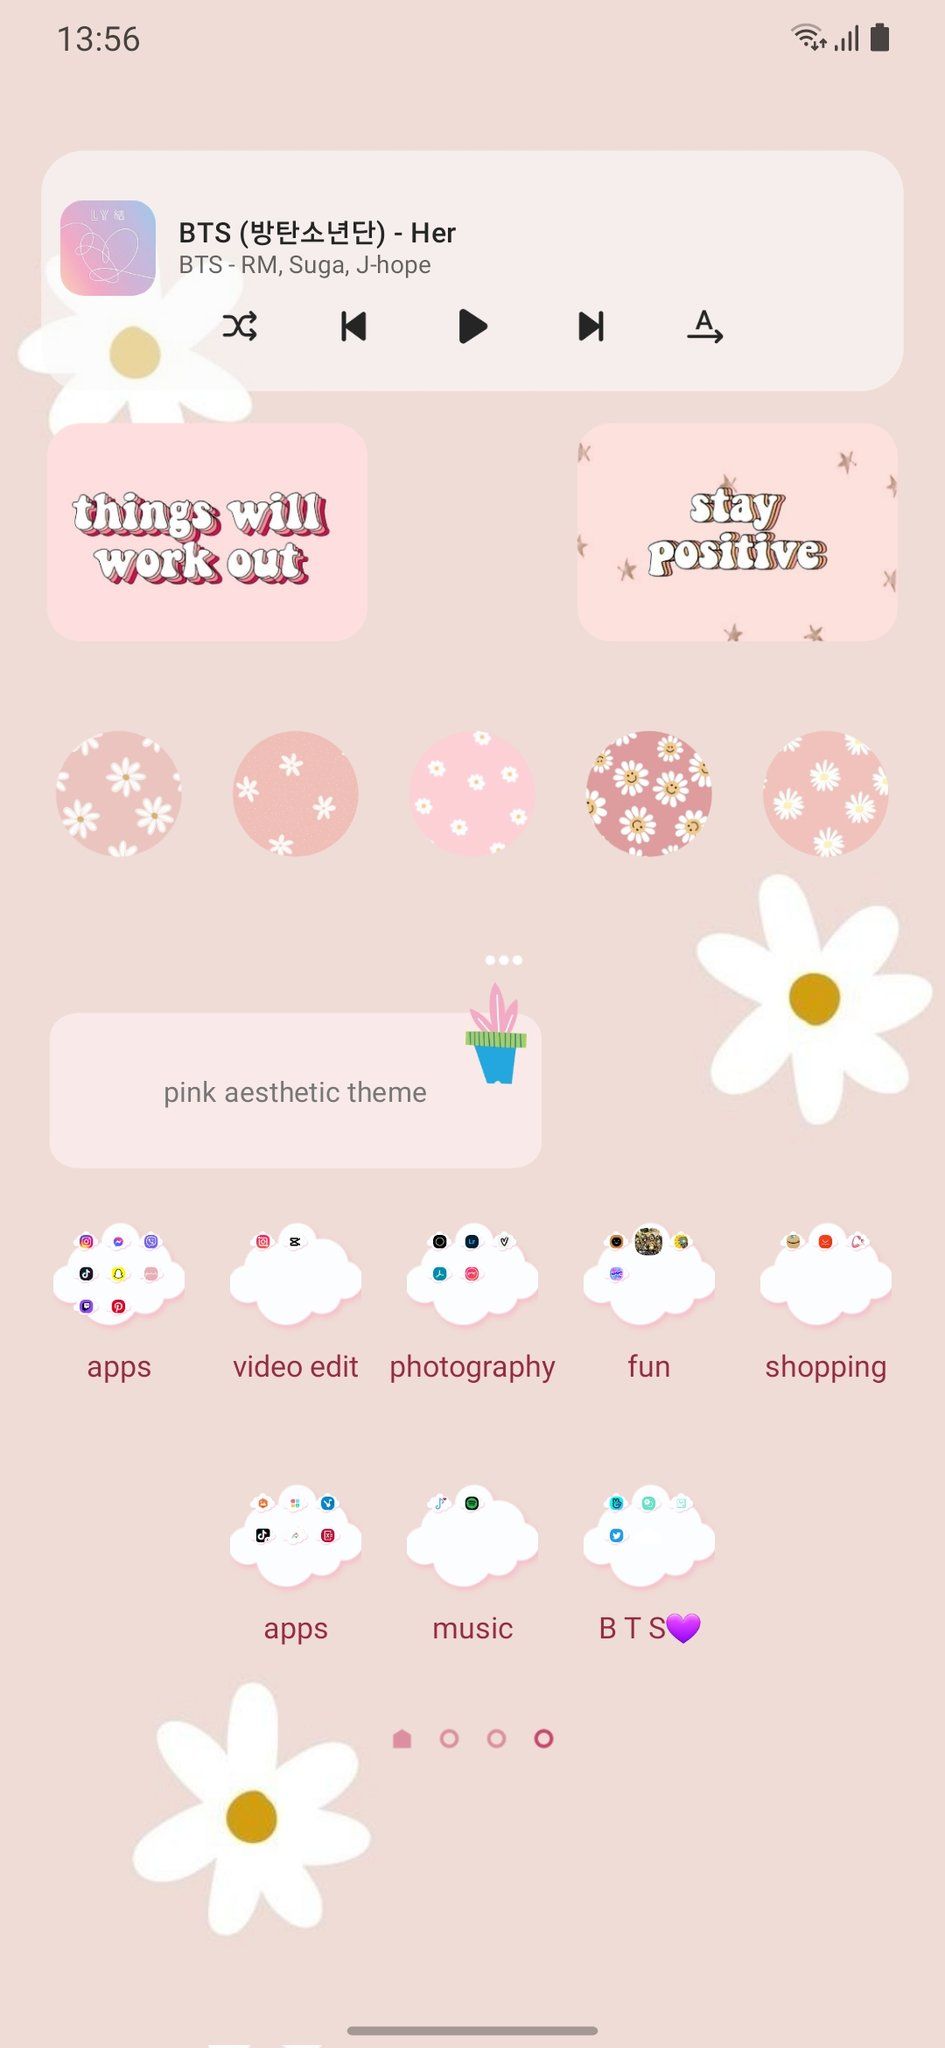 yov to make your phone aesthetic